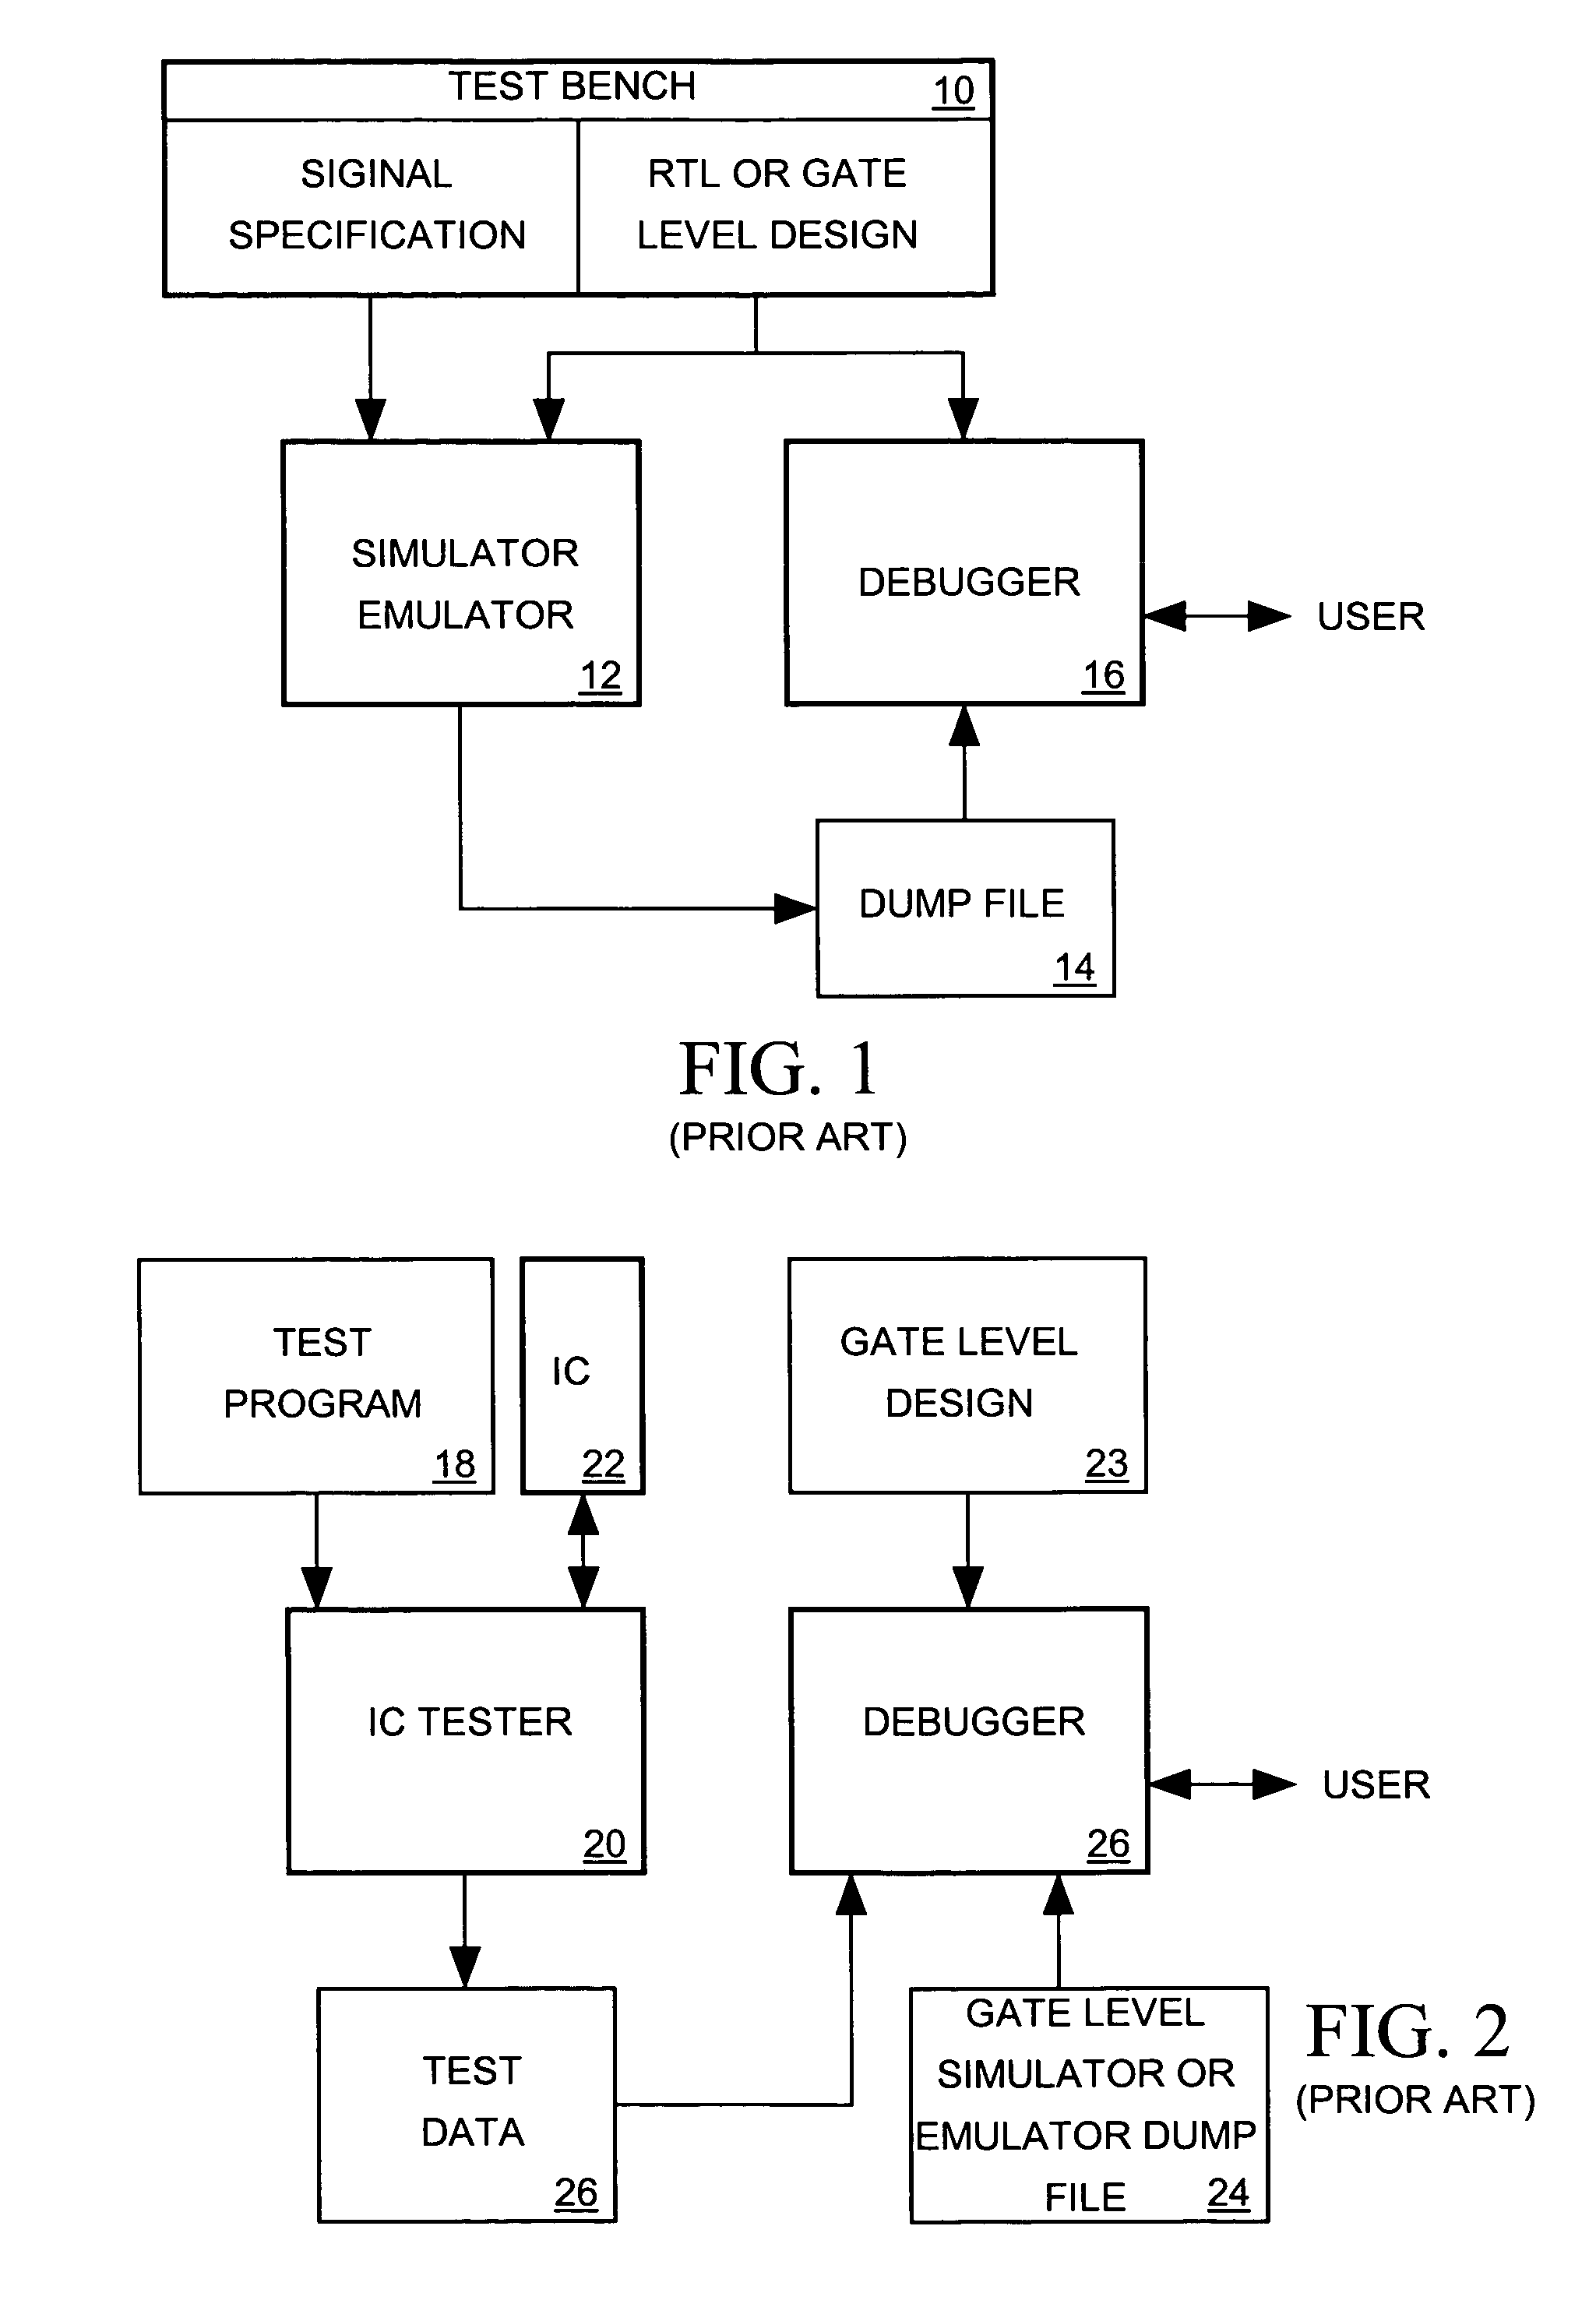 Debugging system for gate level IC designs